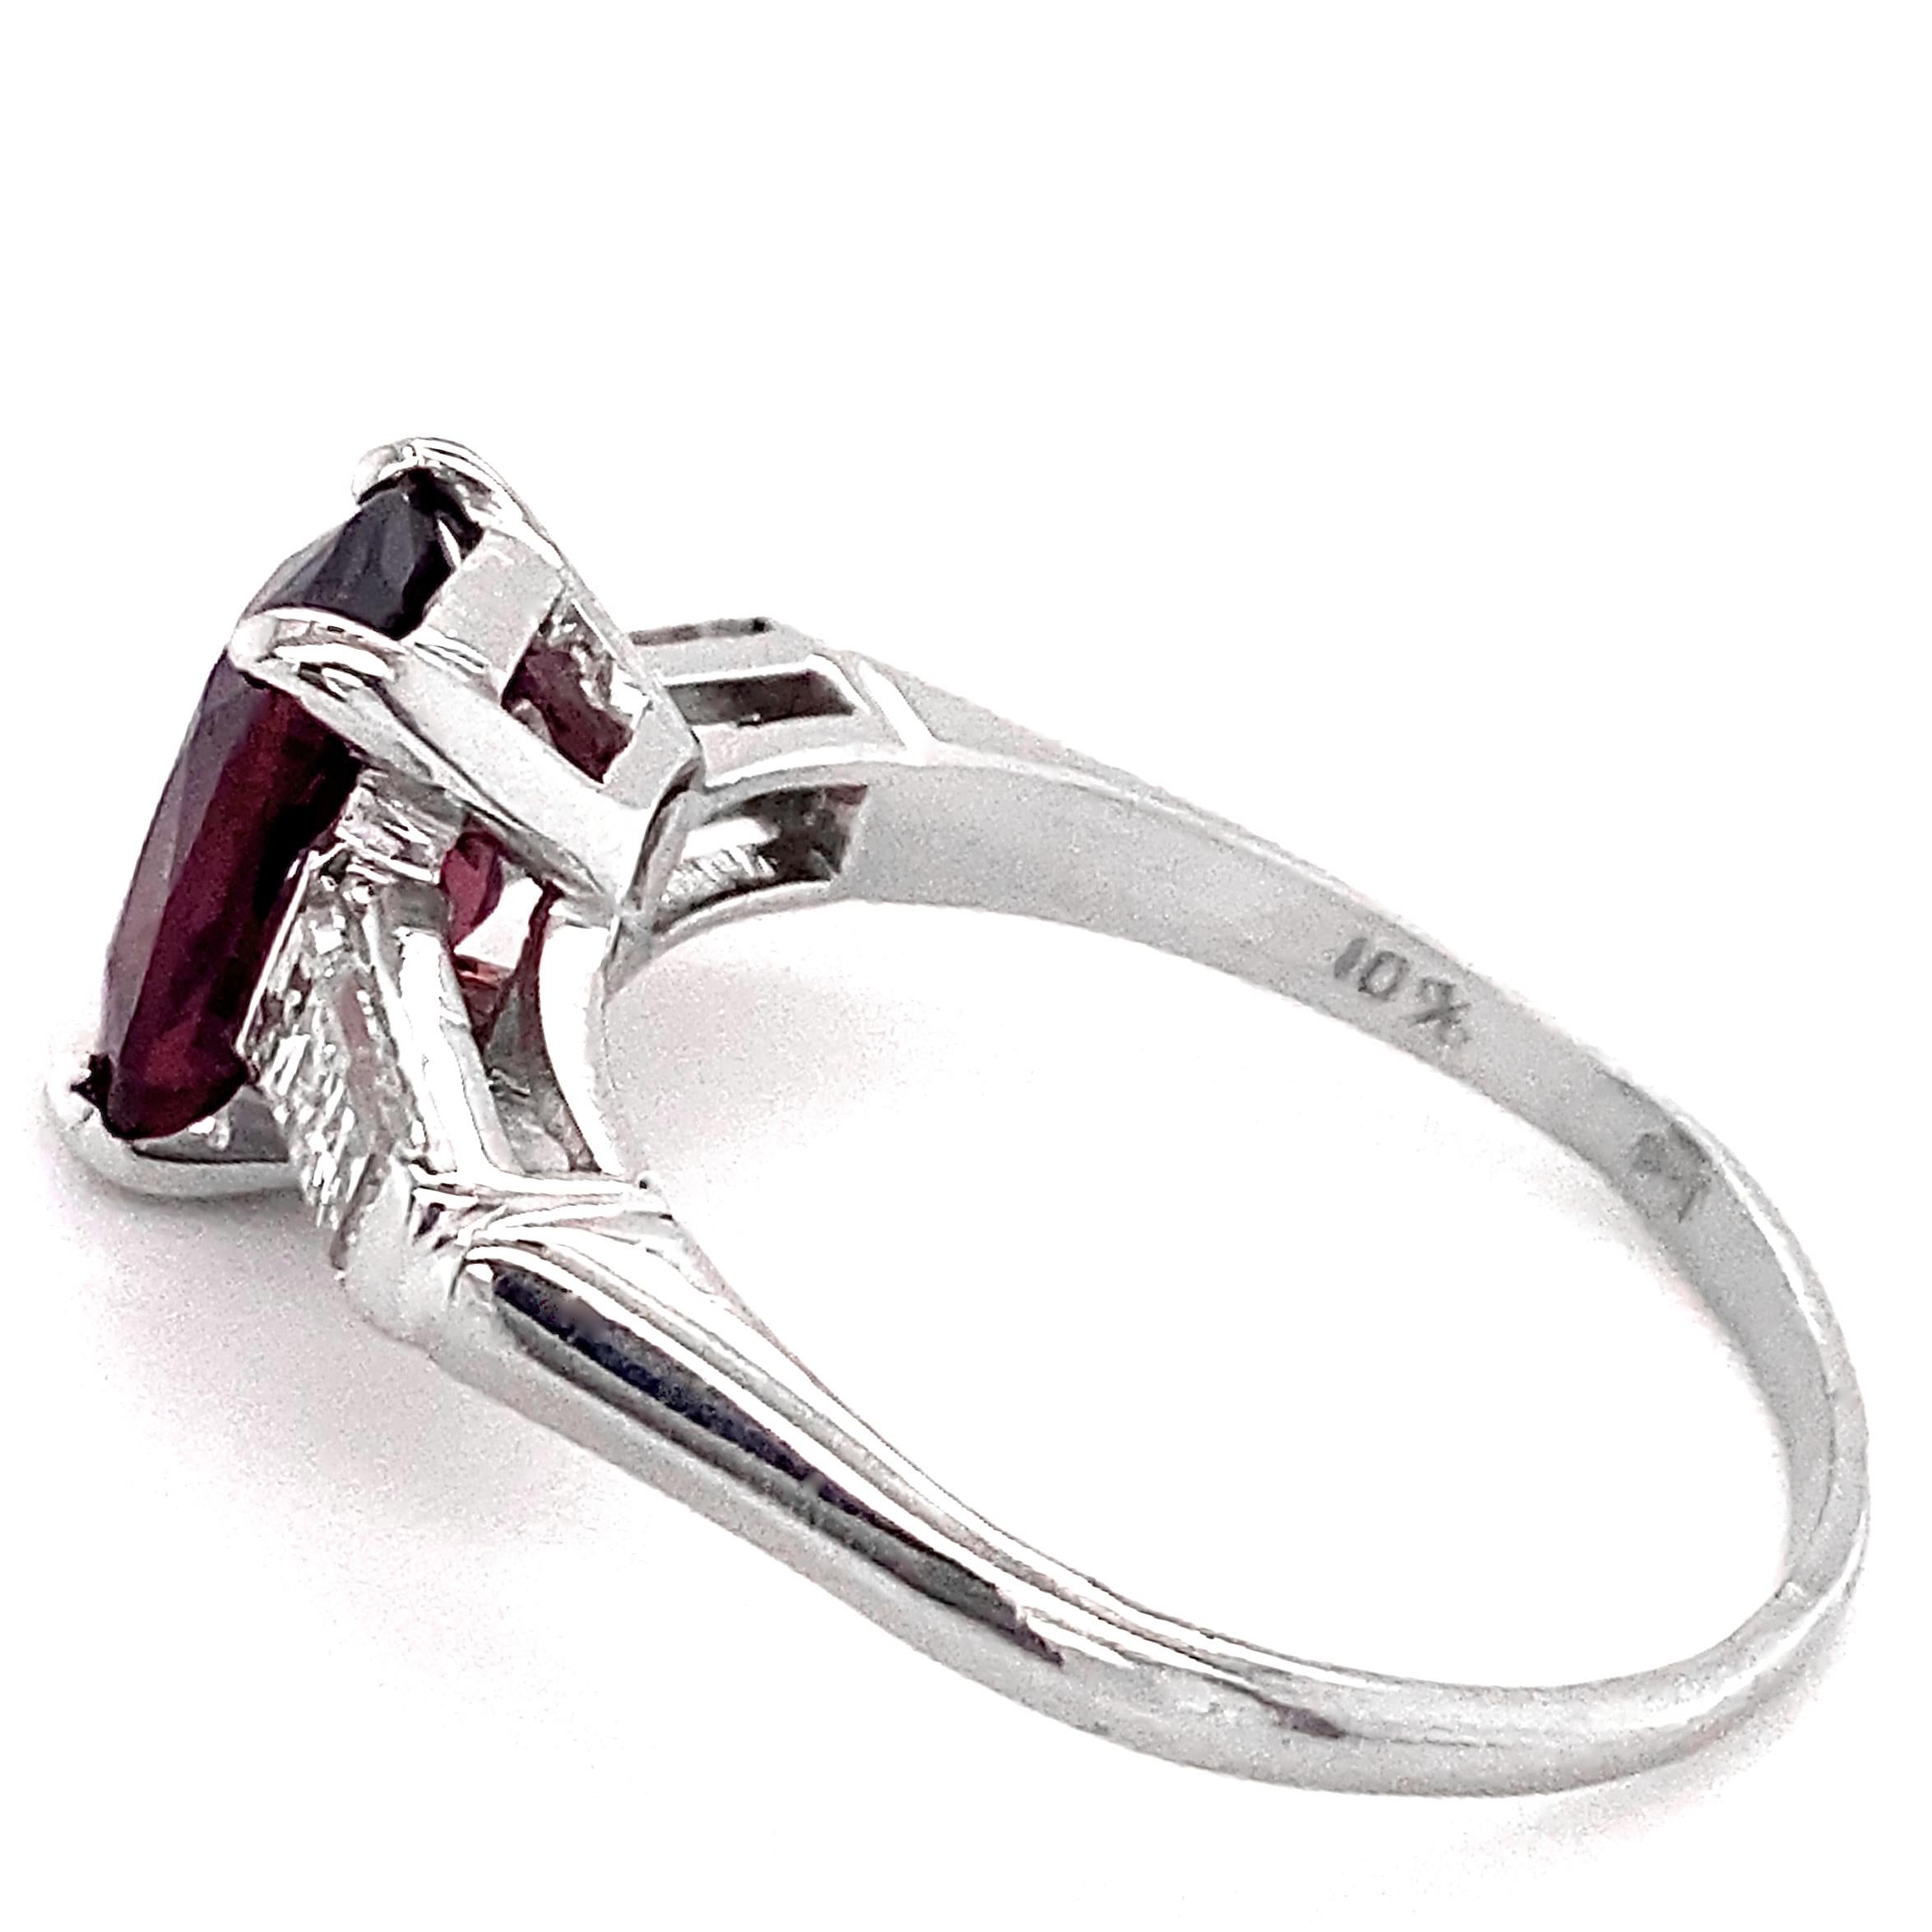 2 Carat Red Spinel Set in Classic Platinum 3-Stone Ring with Diamond Baguettes 4